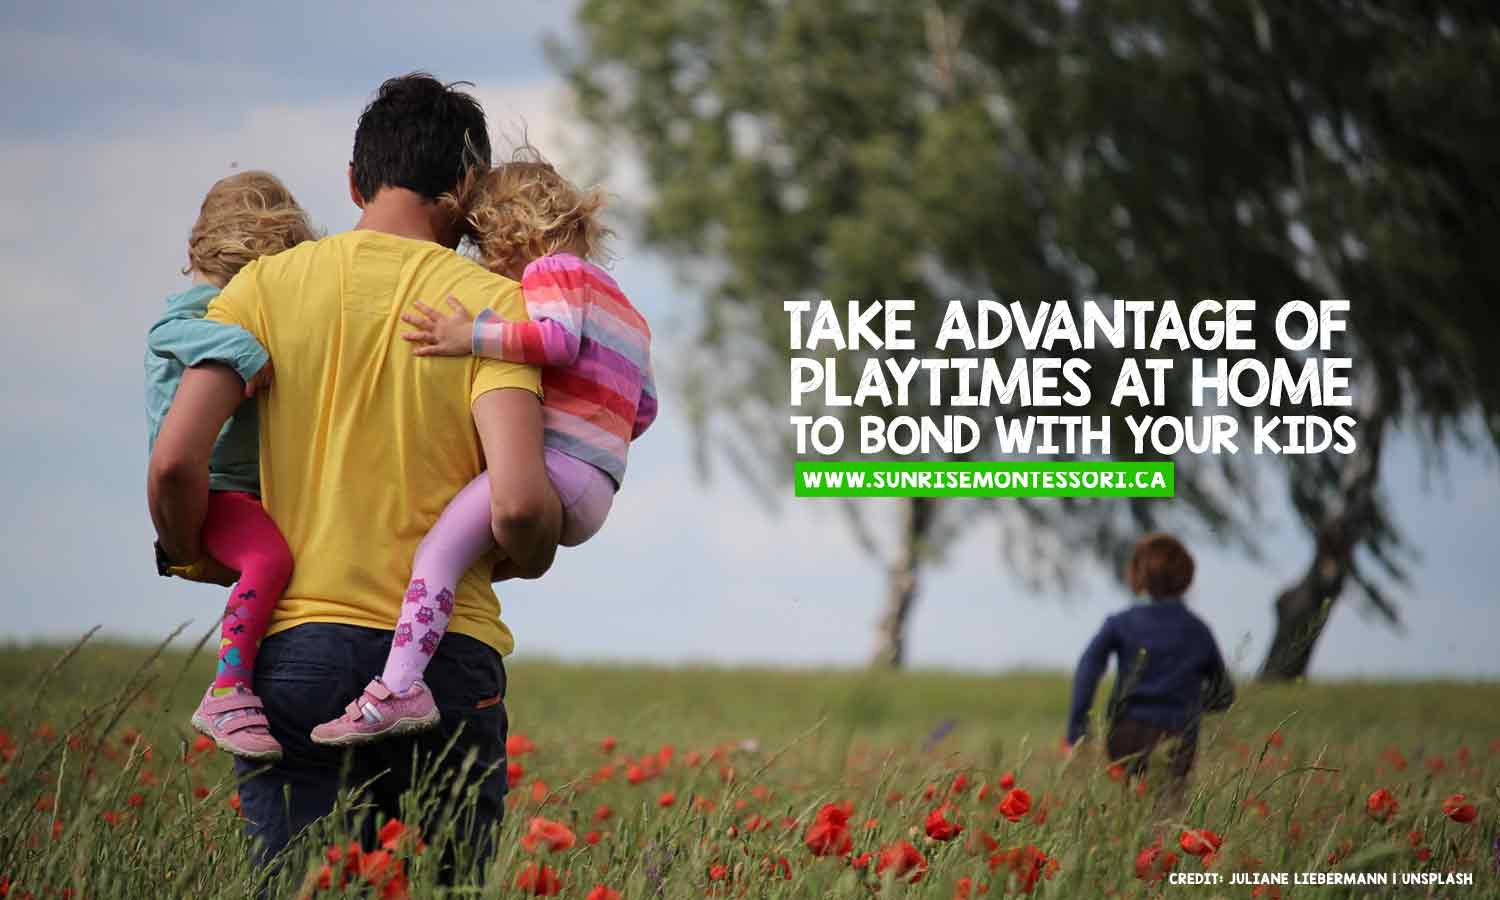 Take advantage of playtimes at home to bond with your kids